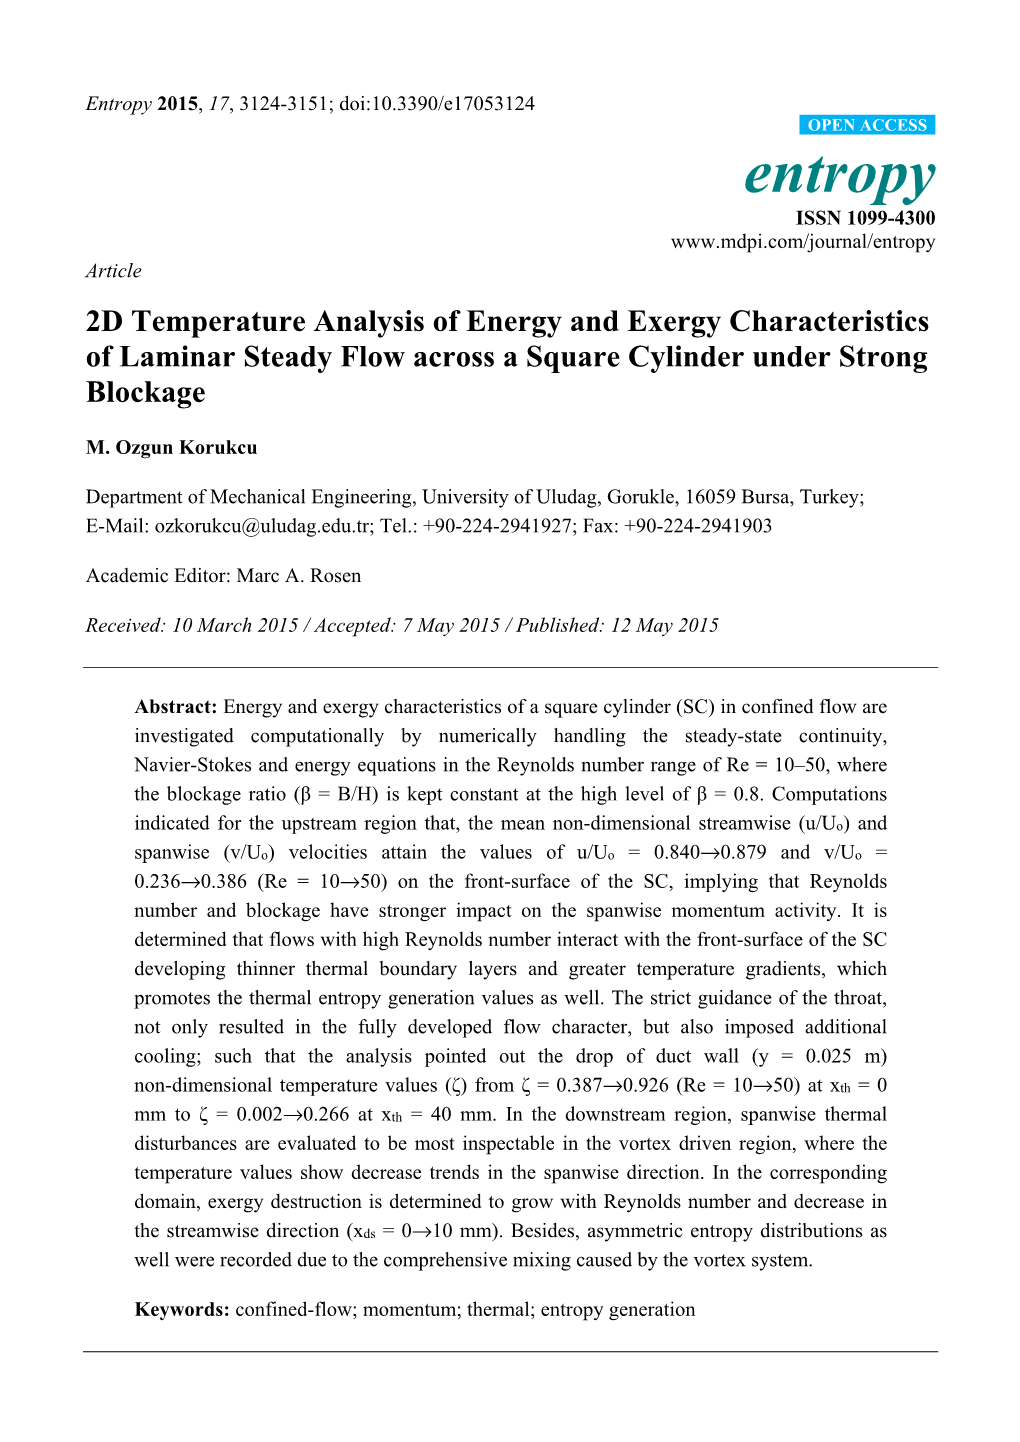 2D Temperature Analysis of Energy and Exergy Characteristics of Laminar Steady Flow Across a Square Cylinder Under Strong Blockage